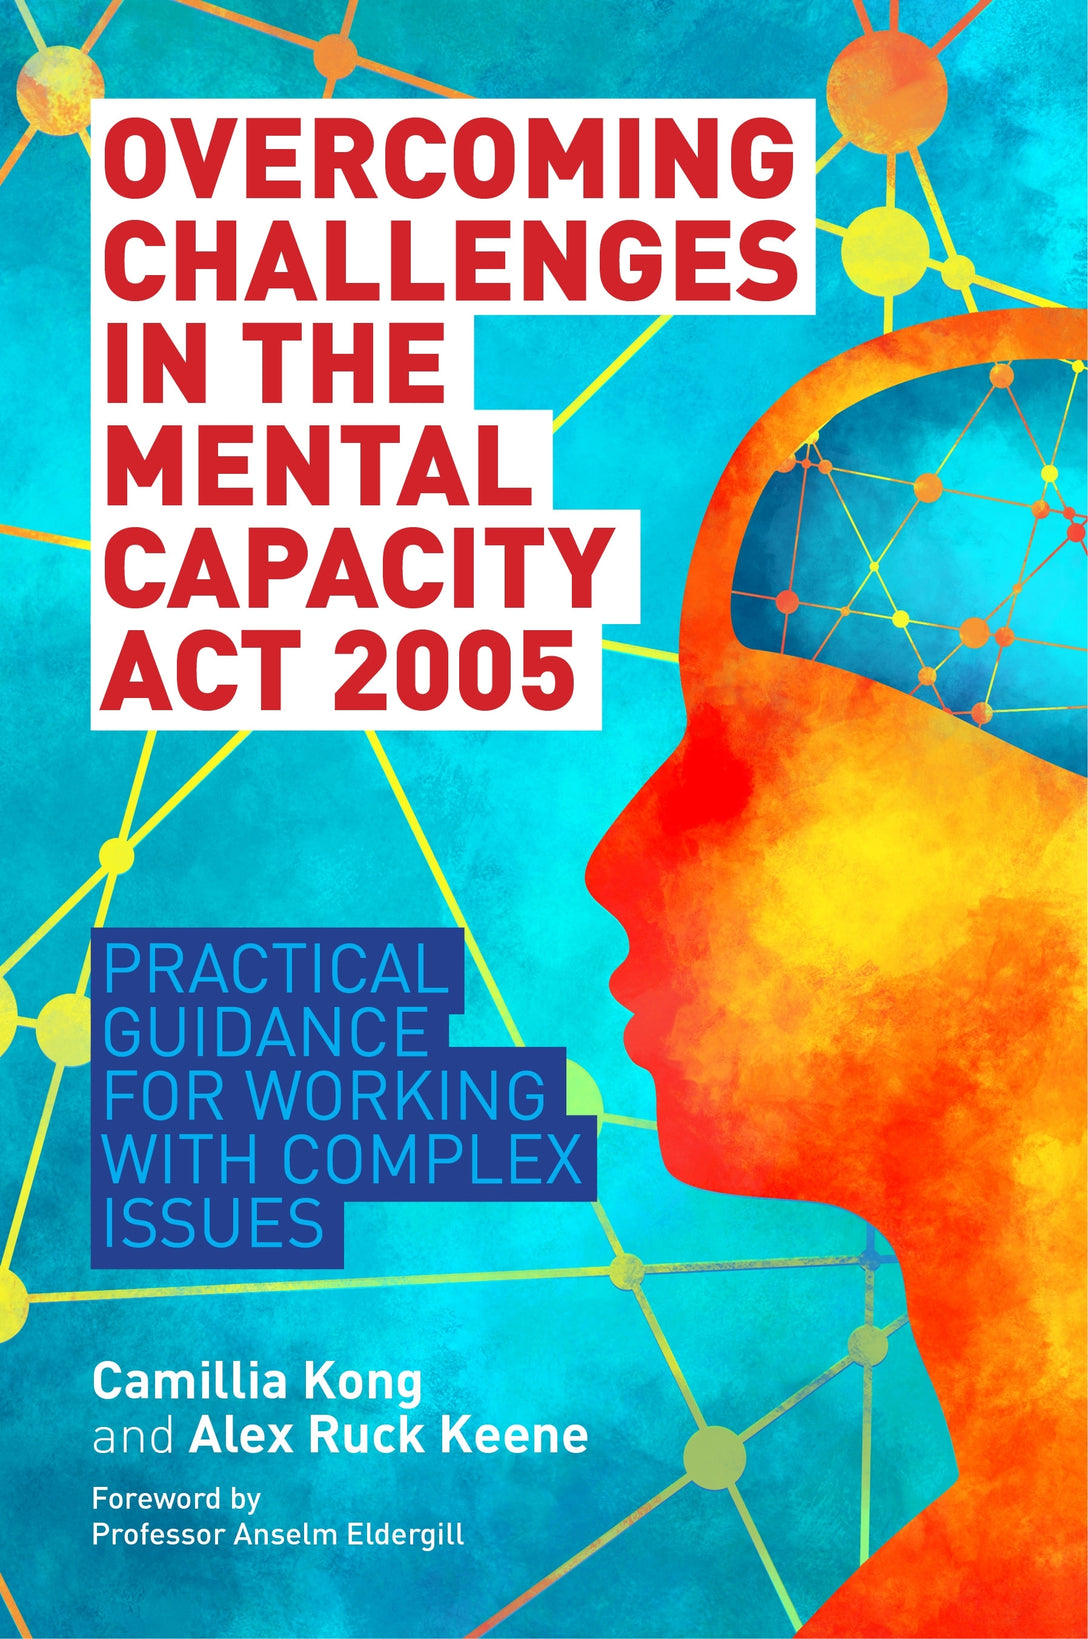 Overcoming Challenges in the Mental Capacity Act 2005 by Camillia Kong, Alex Ruck Ruck Keene, Anselm Eldergill